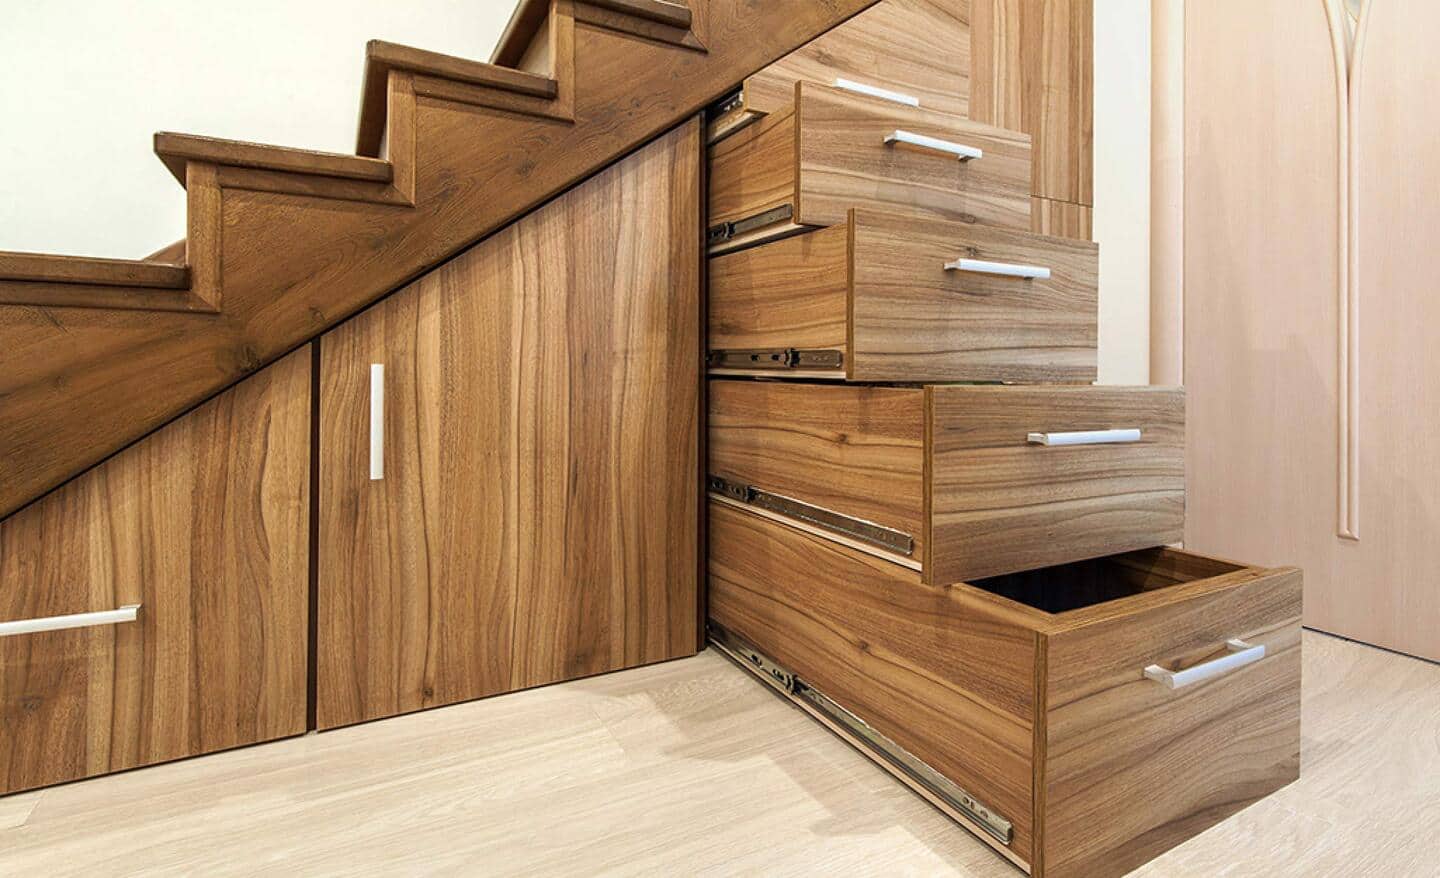 A staircase contains built-in storage.